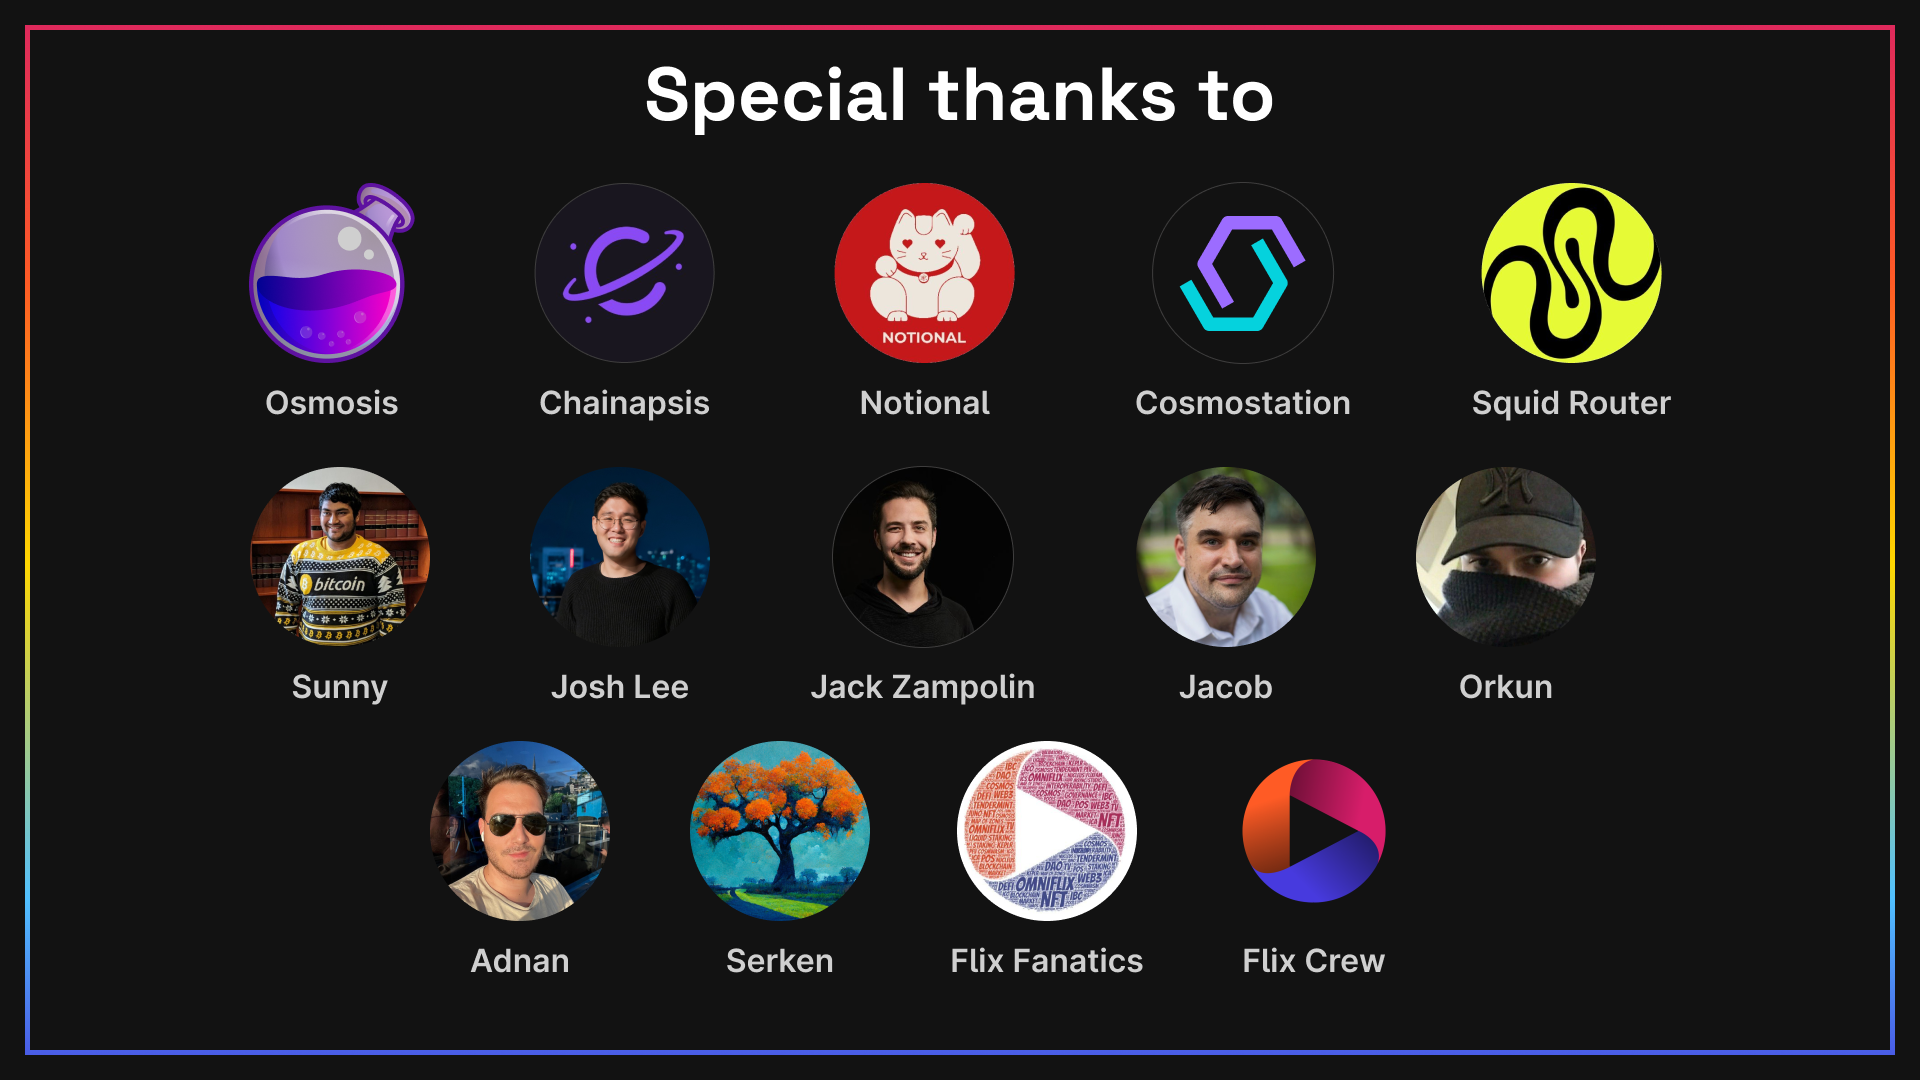 The individuals and teams responsible for making the FLIX / OSMO StreamSwap stream happen the way it did